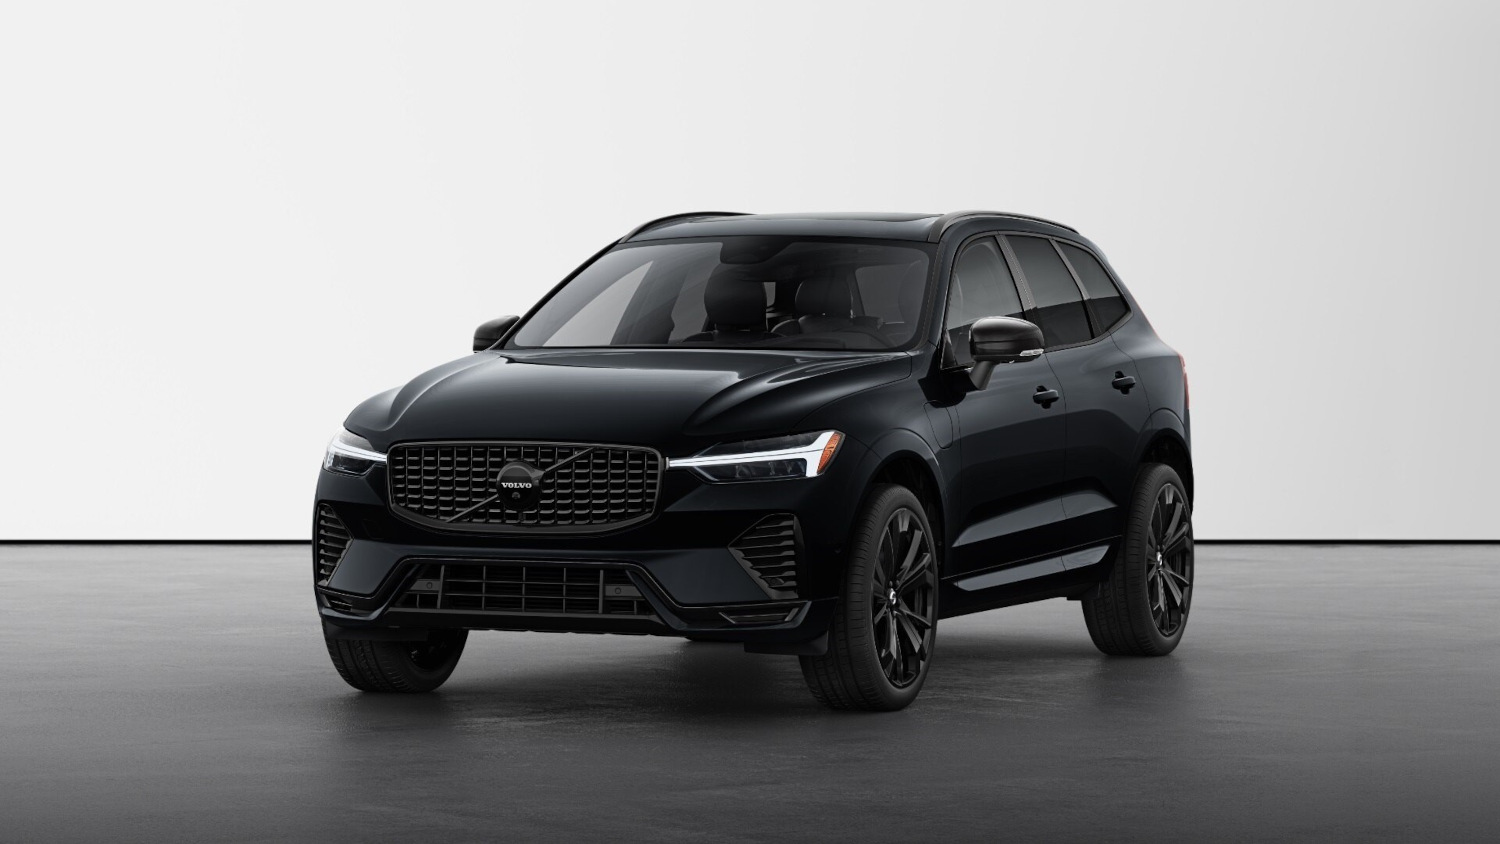 This small luxury SUV from Volvo has mixed reviews